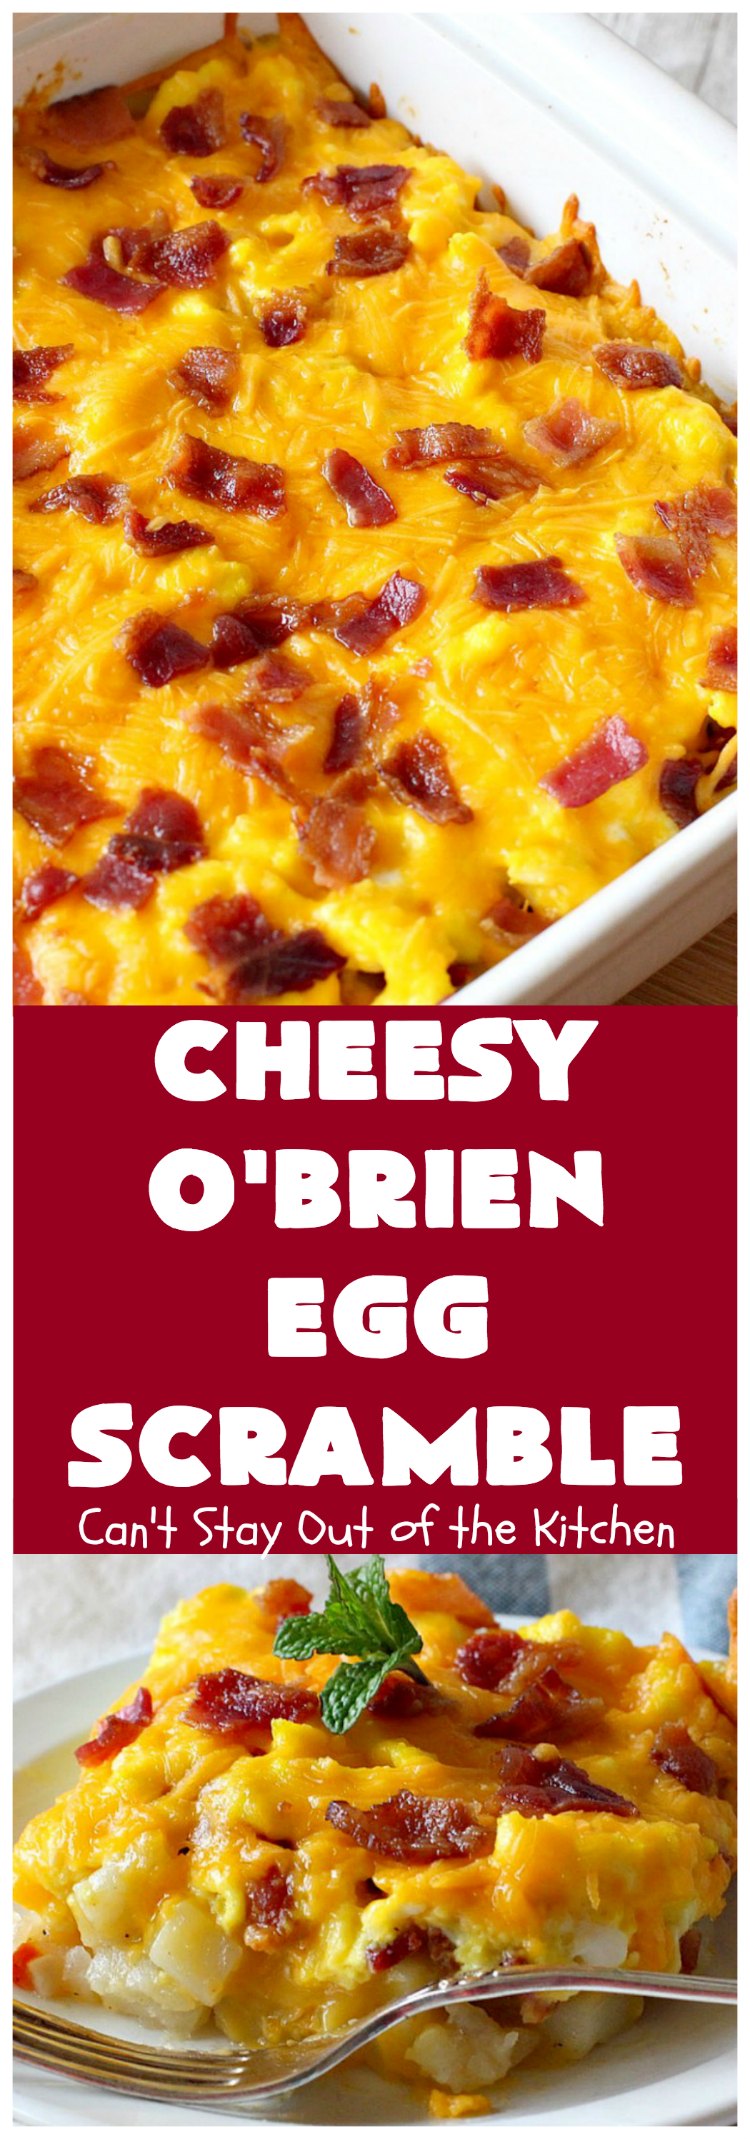 Cheesy O'Brien Egg Scramble | Can't Stay Out of the Kitchen